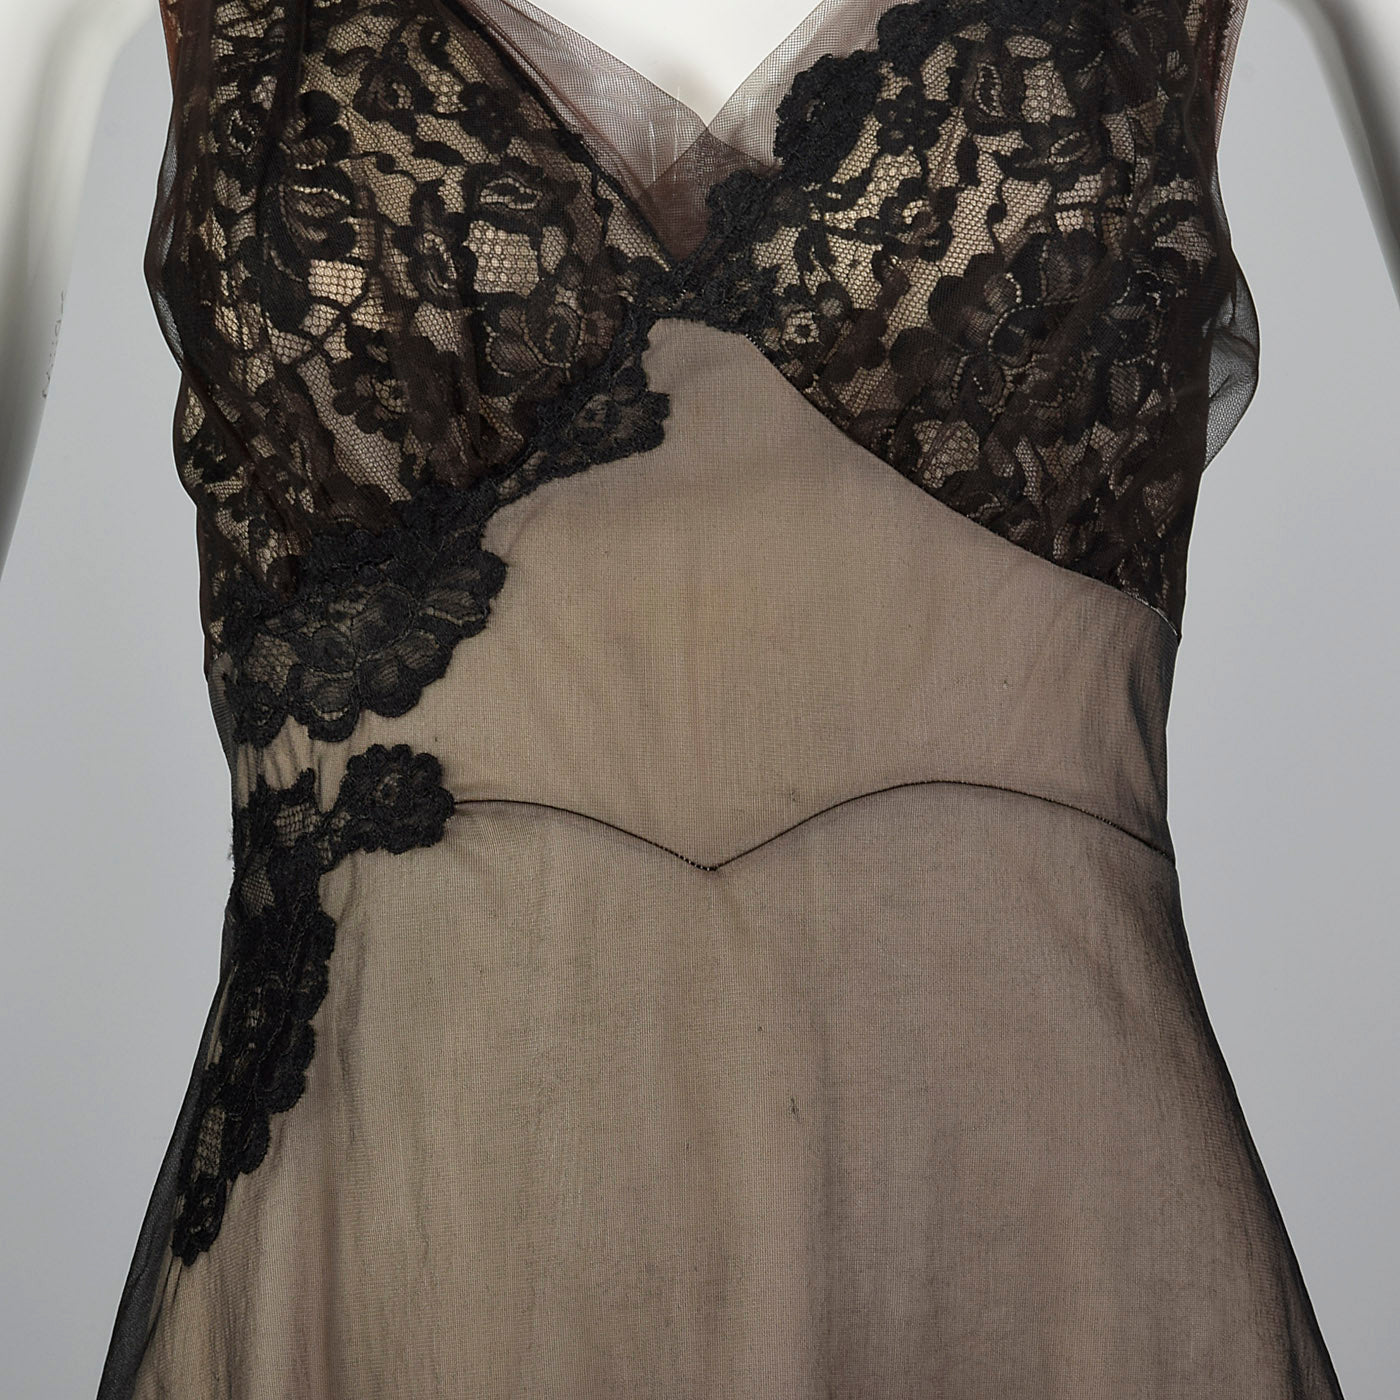 1950s Black Nightgown with Black Lace Applique